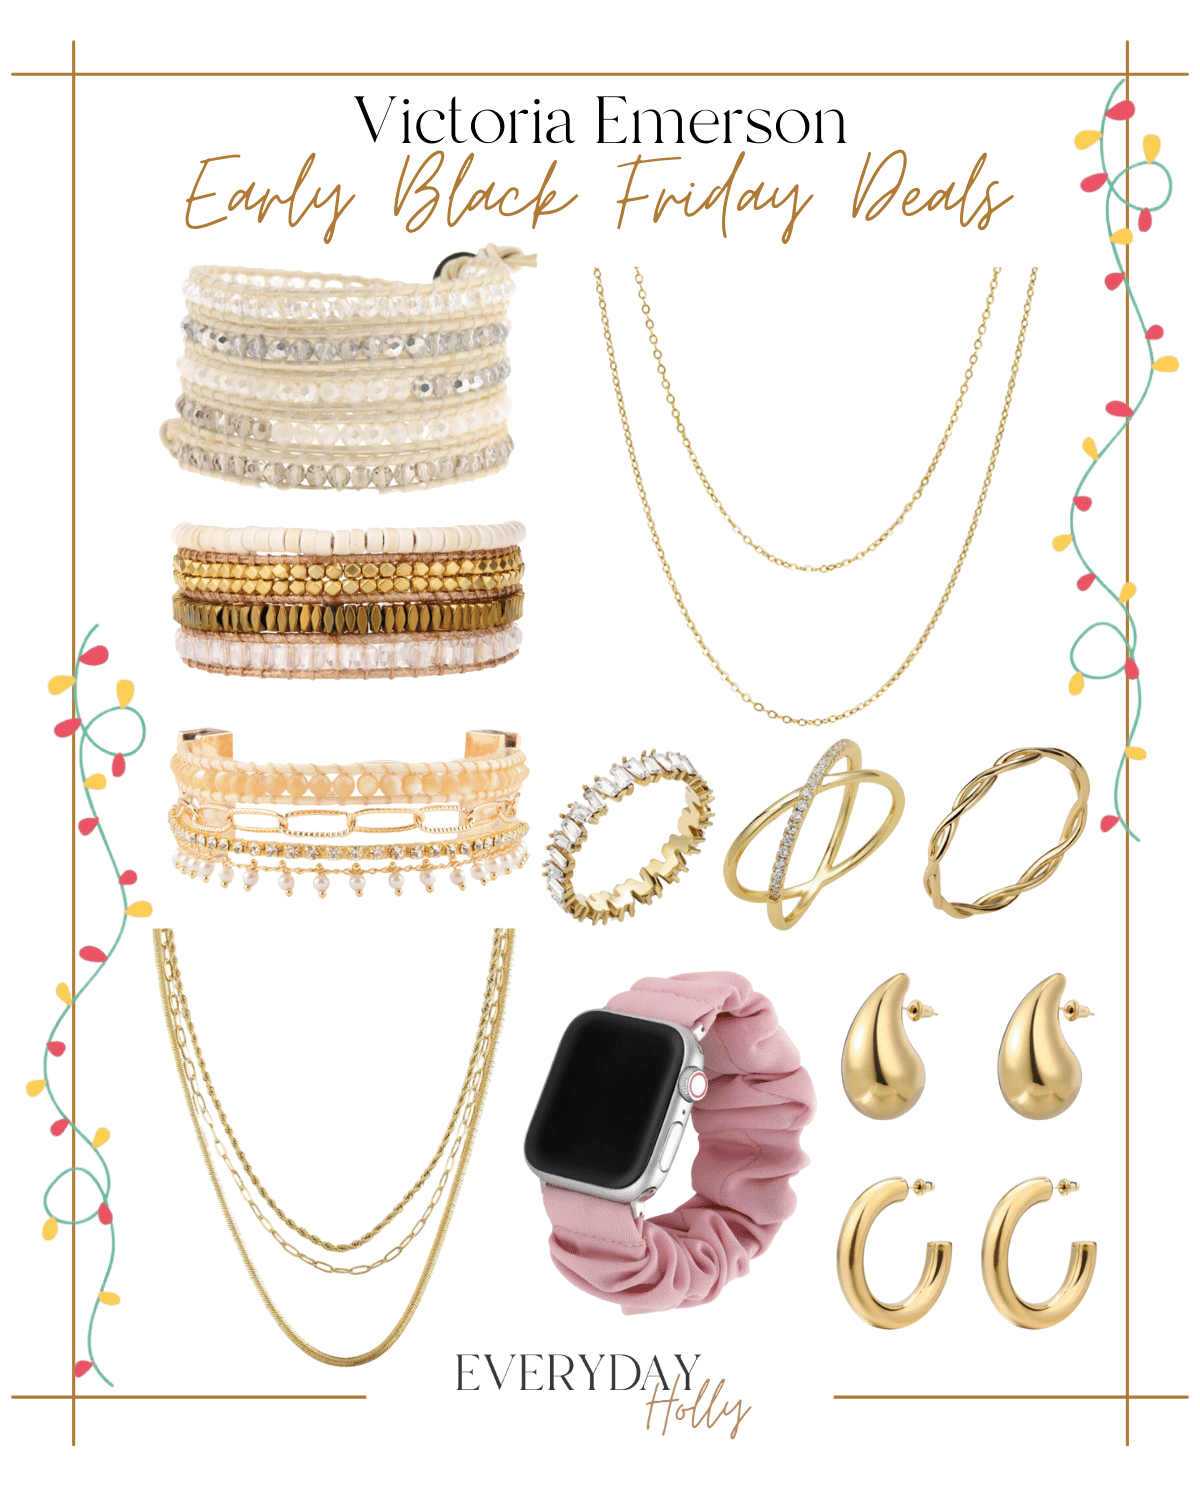 shop early black friday deals now | #shop #blackfriday #deals #earlyblackfriday #jewelry #goldjewelry #accessories  #earrings #rings #bracelets #necklaces #gold